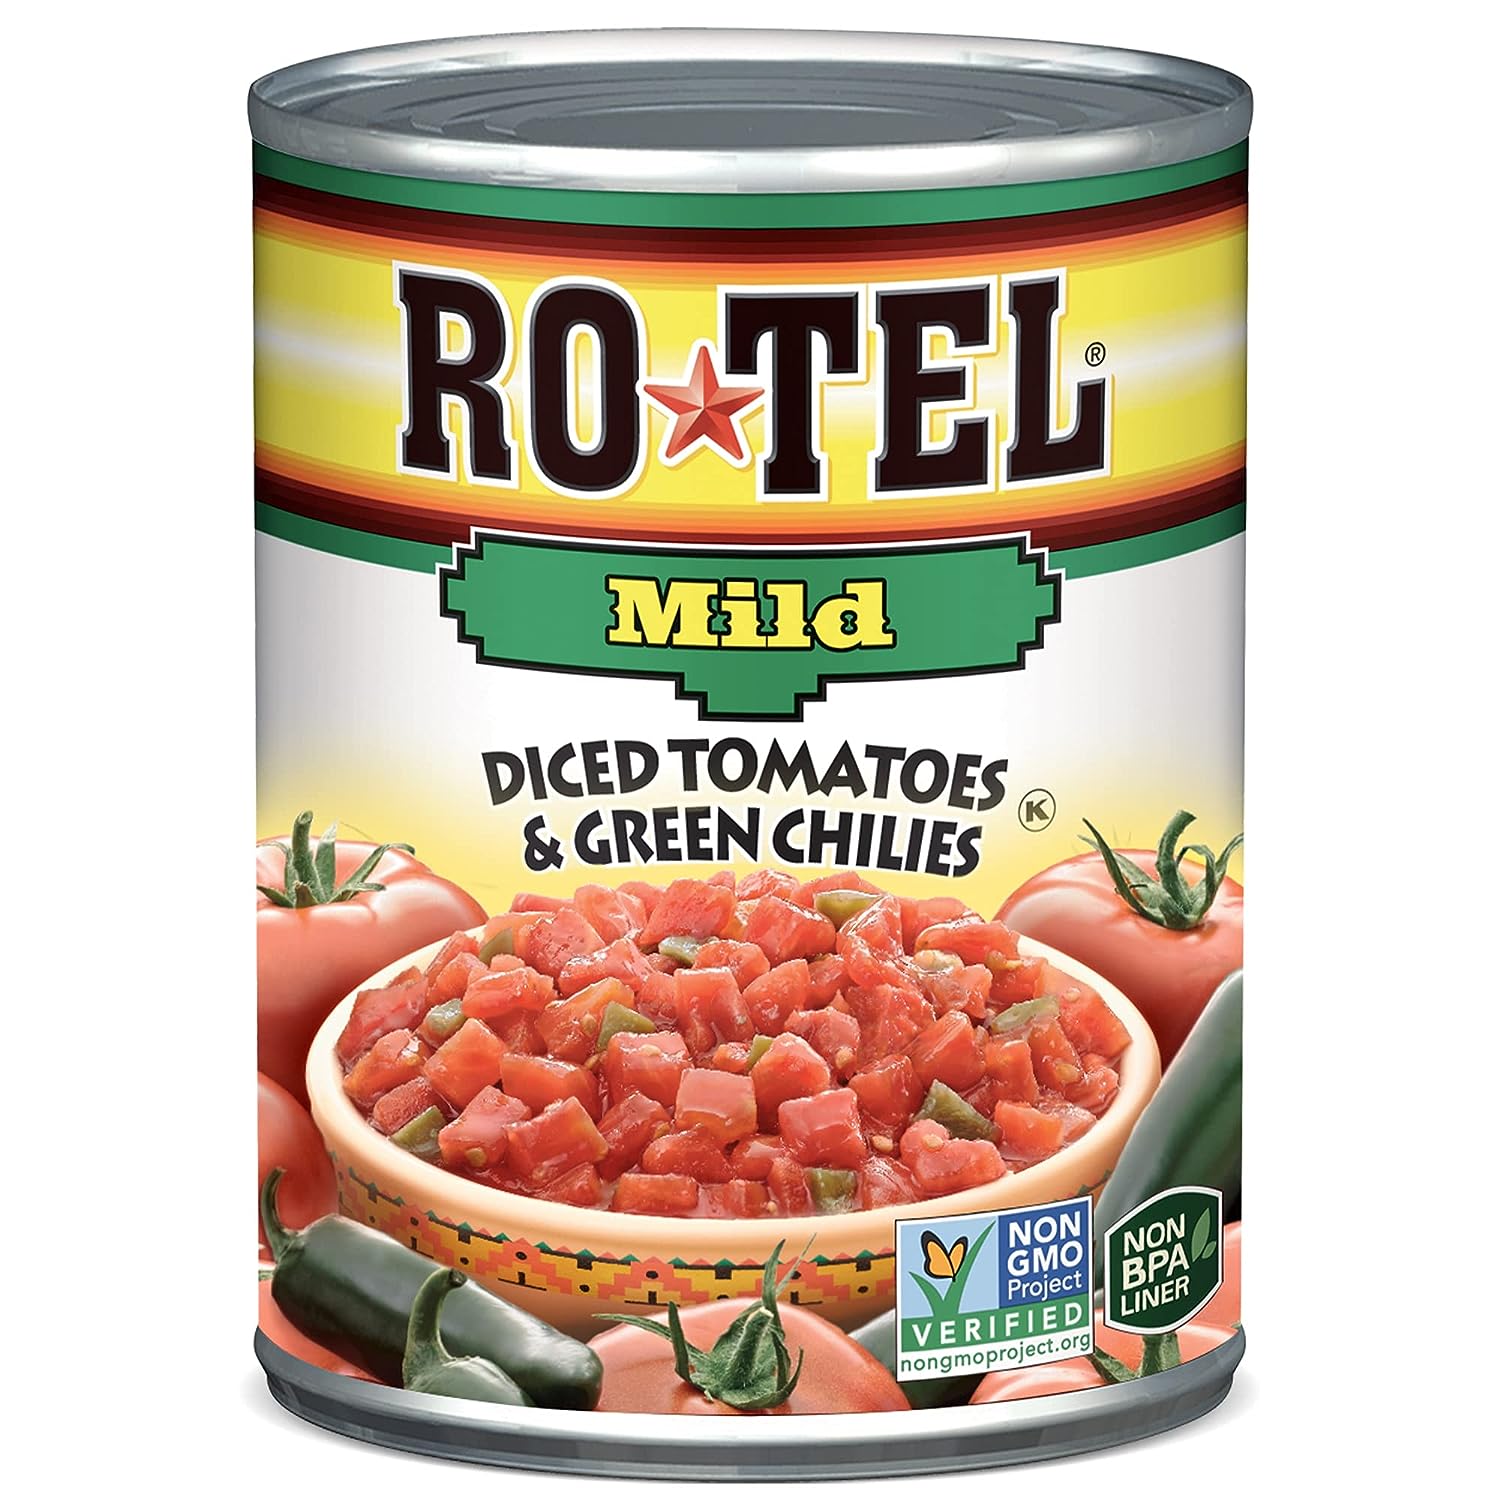 ROTEL Mild Diced Tomatoes and Green Chilies, 10 oz. (Pack of 24)